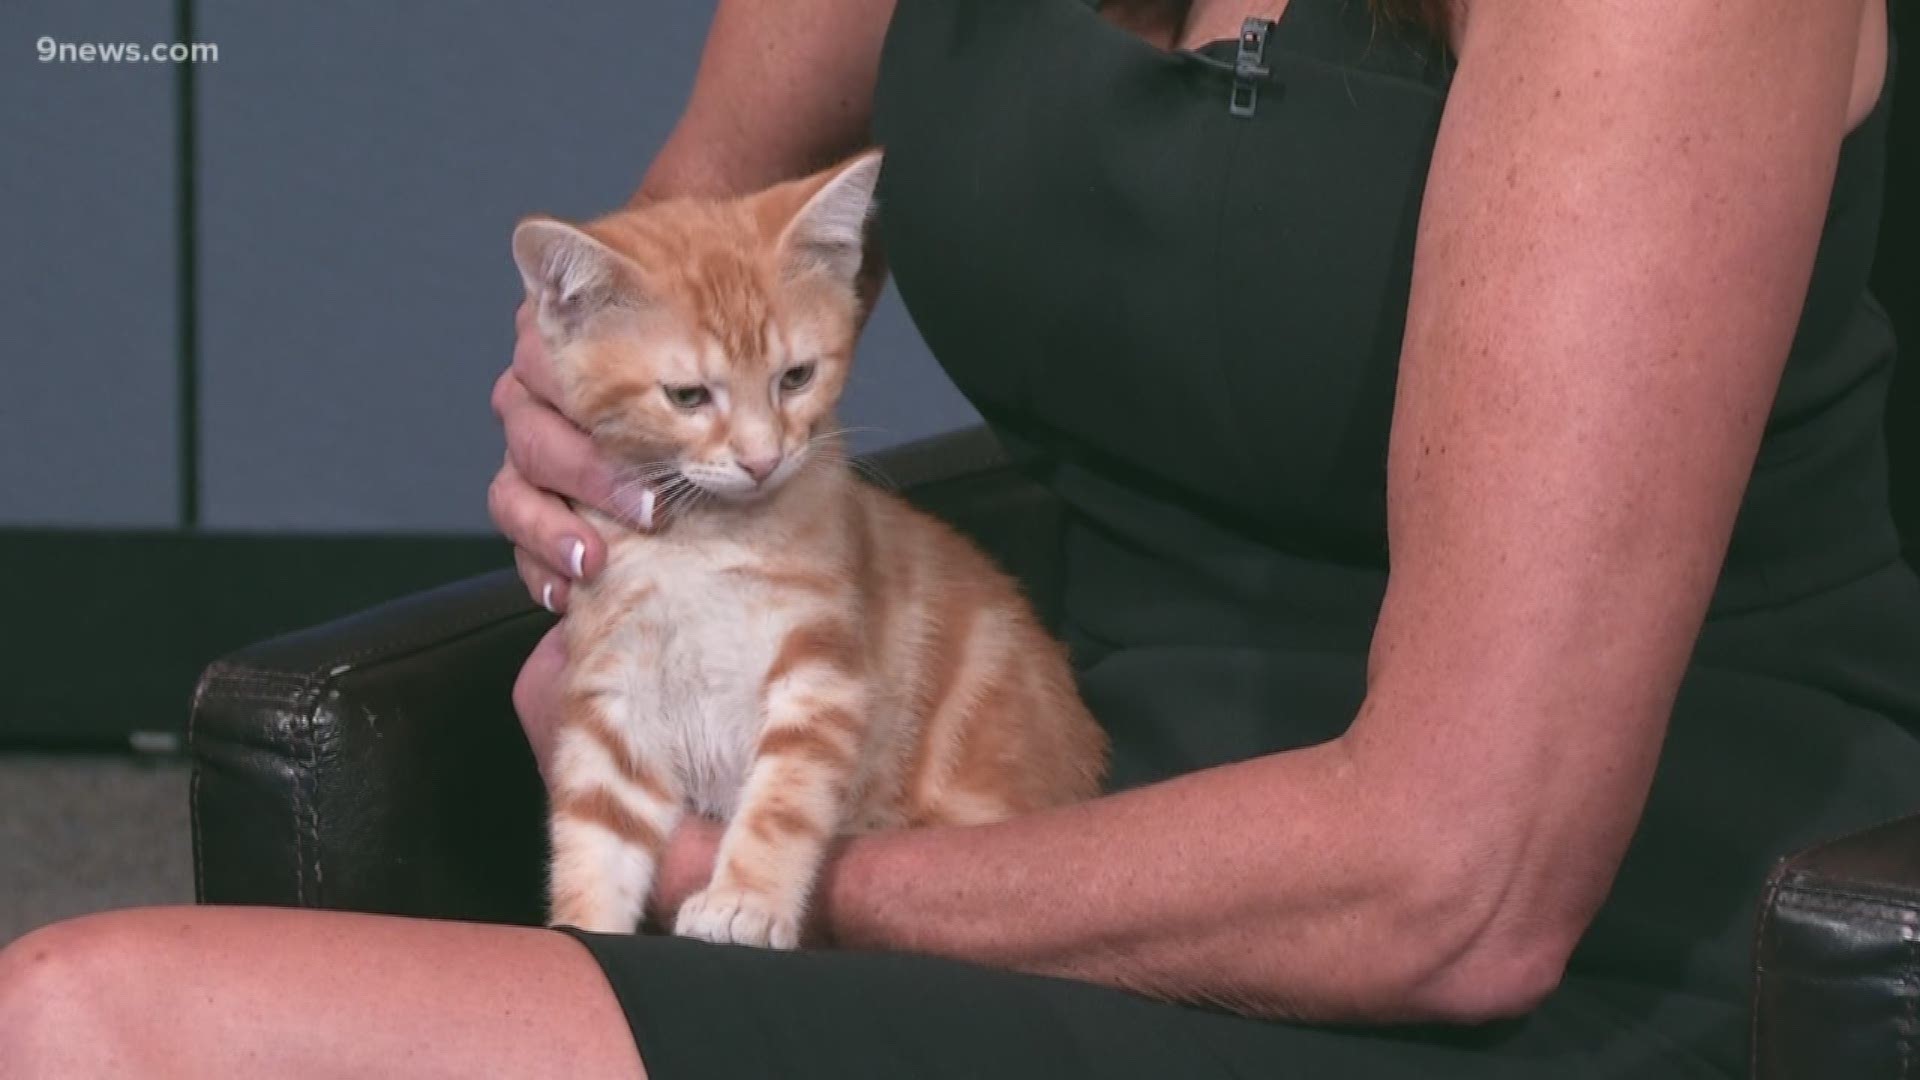 These kitties are 12-week-old orange tabbys and are microchipped, neutered, litter trained, tested and ready to go to a loving home! Visit the Cat Care Society or call (303) 239-9680 to meet them!